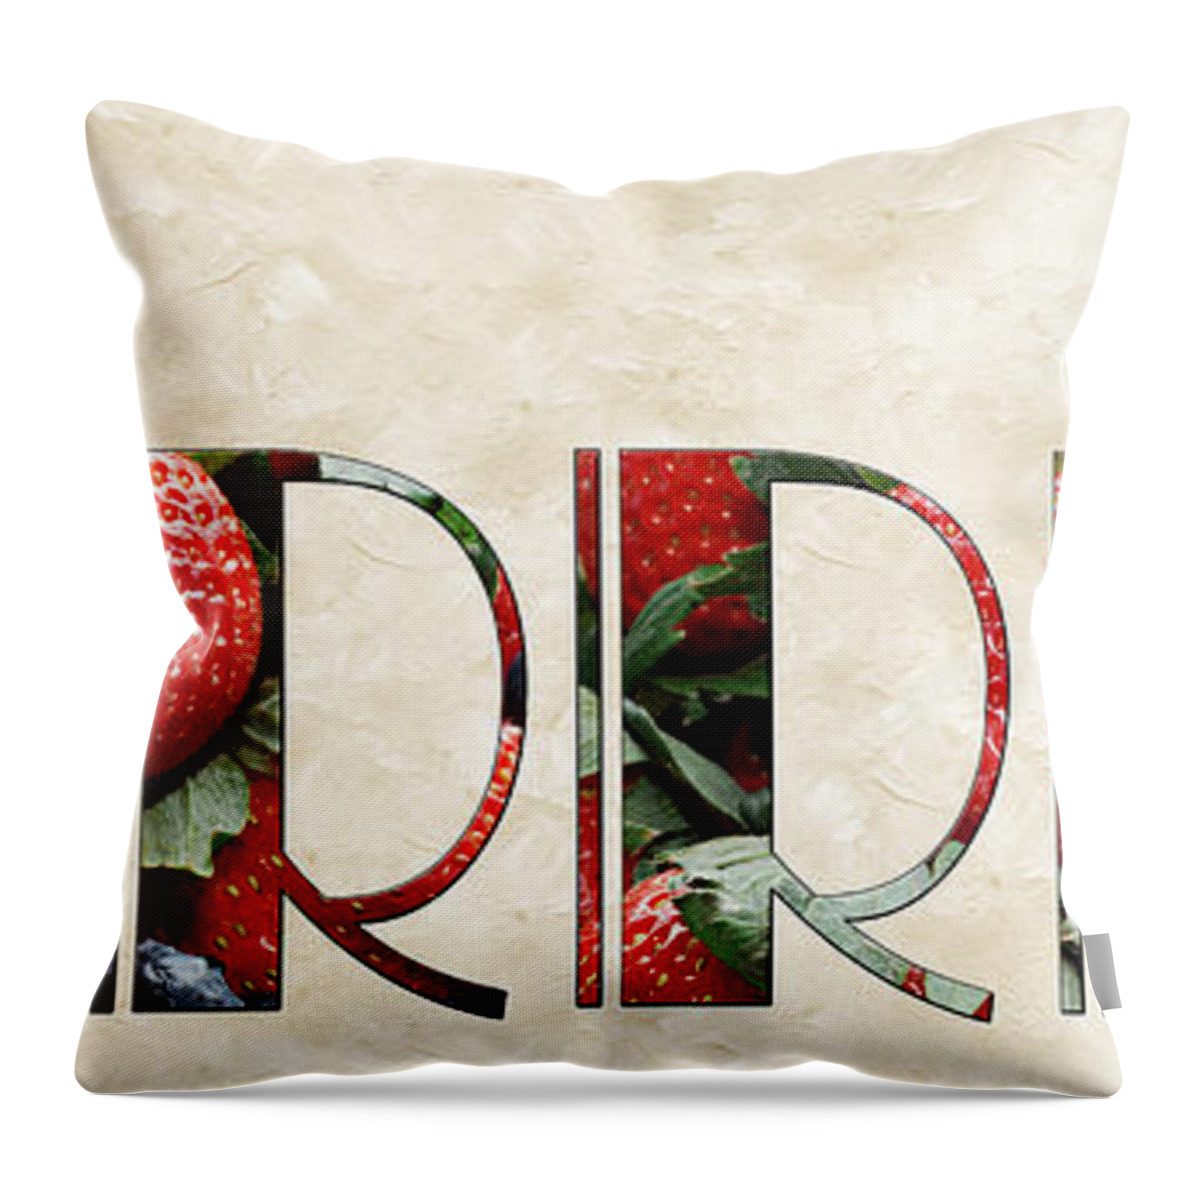 Strawberries Throw Pillow featuring the photograph The Word Is Berries by Andee Design